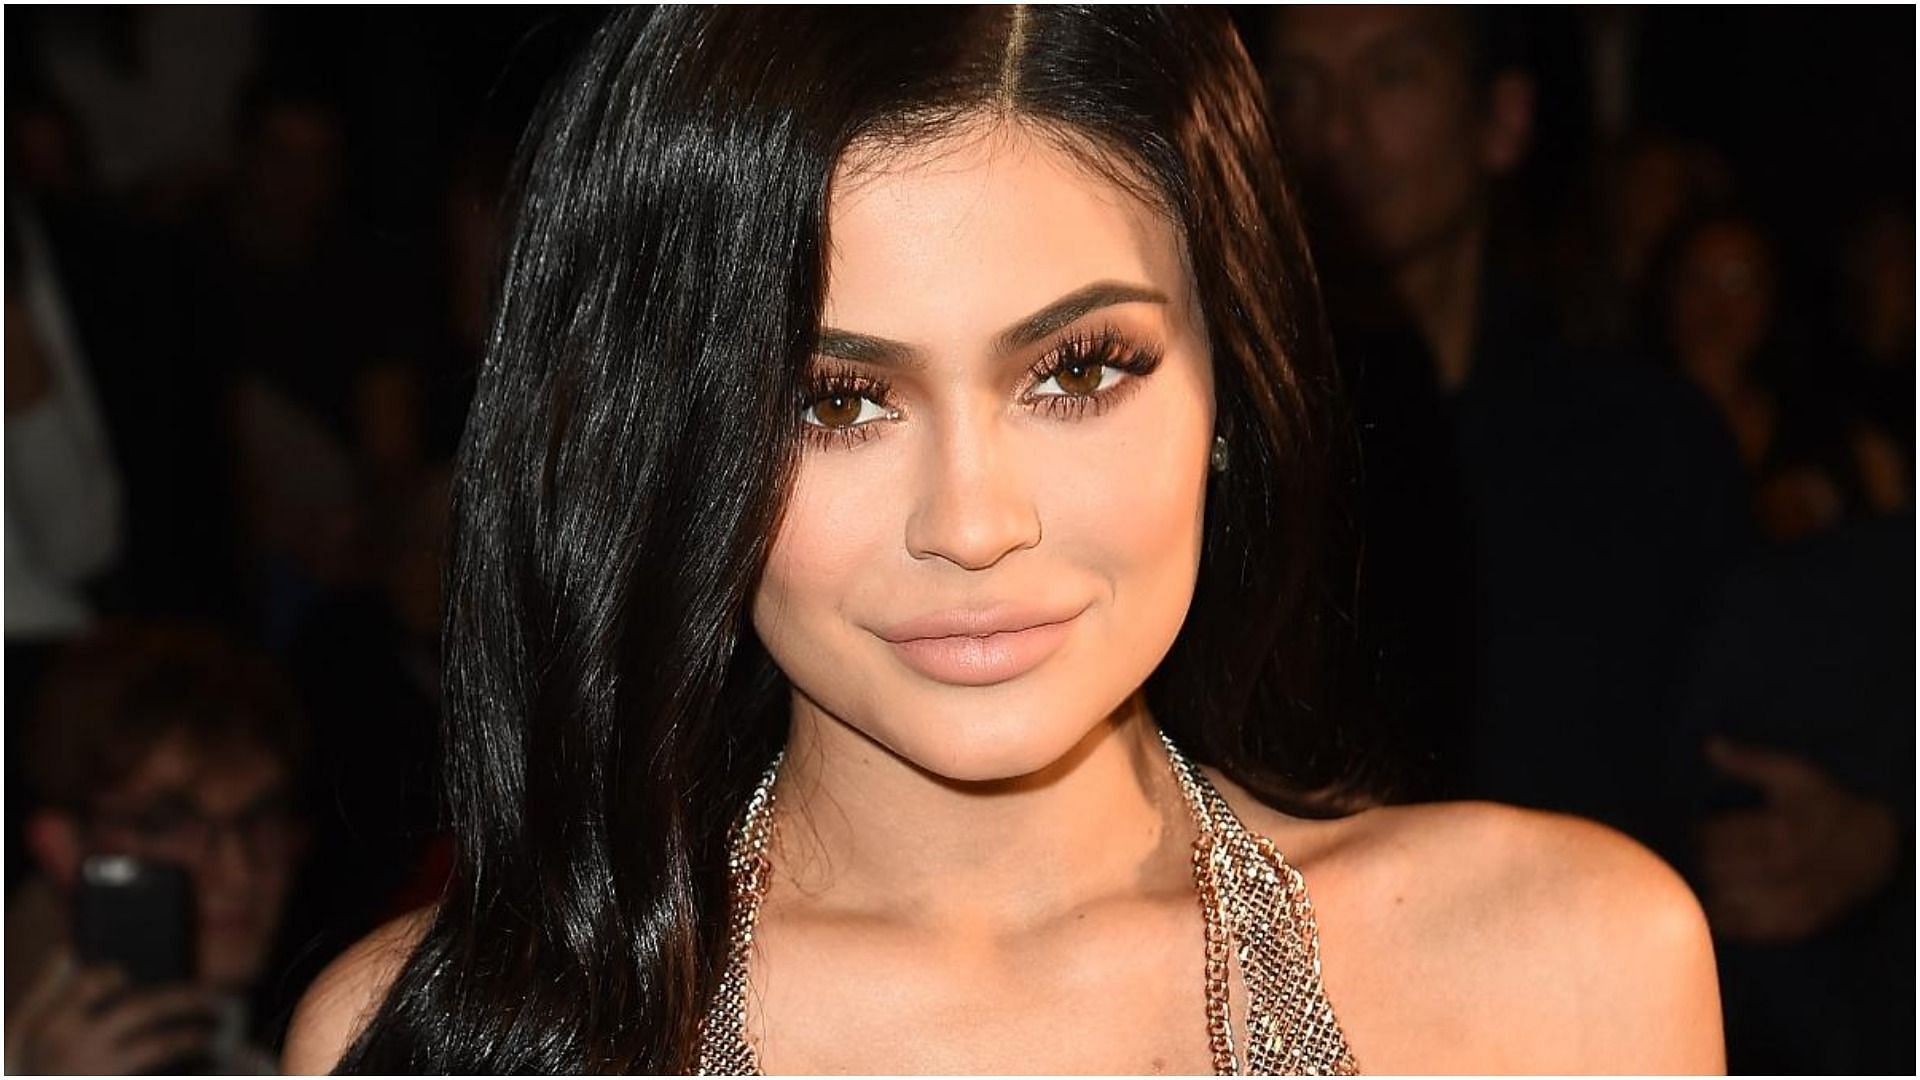 Kylie Jenner (Image via Getty Images)